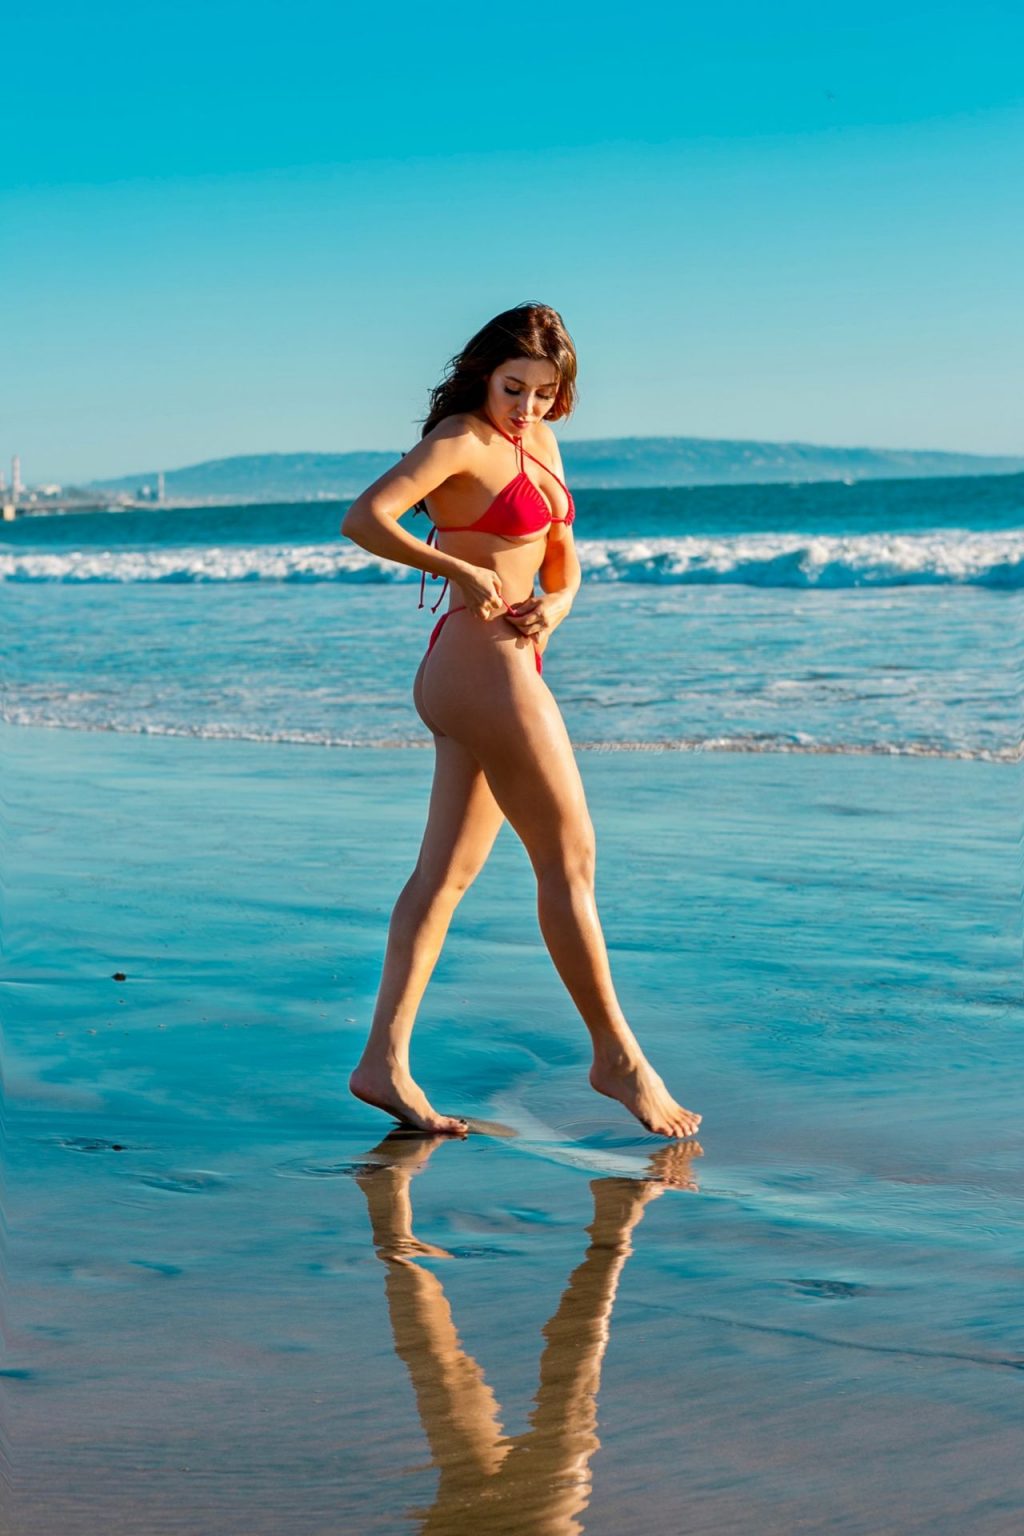 Jewell Farshad Flaunts Her Athletic Body in a Skimpy Red Bikini (8 Photos)